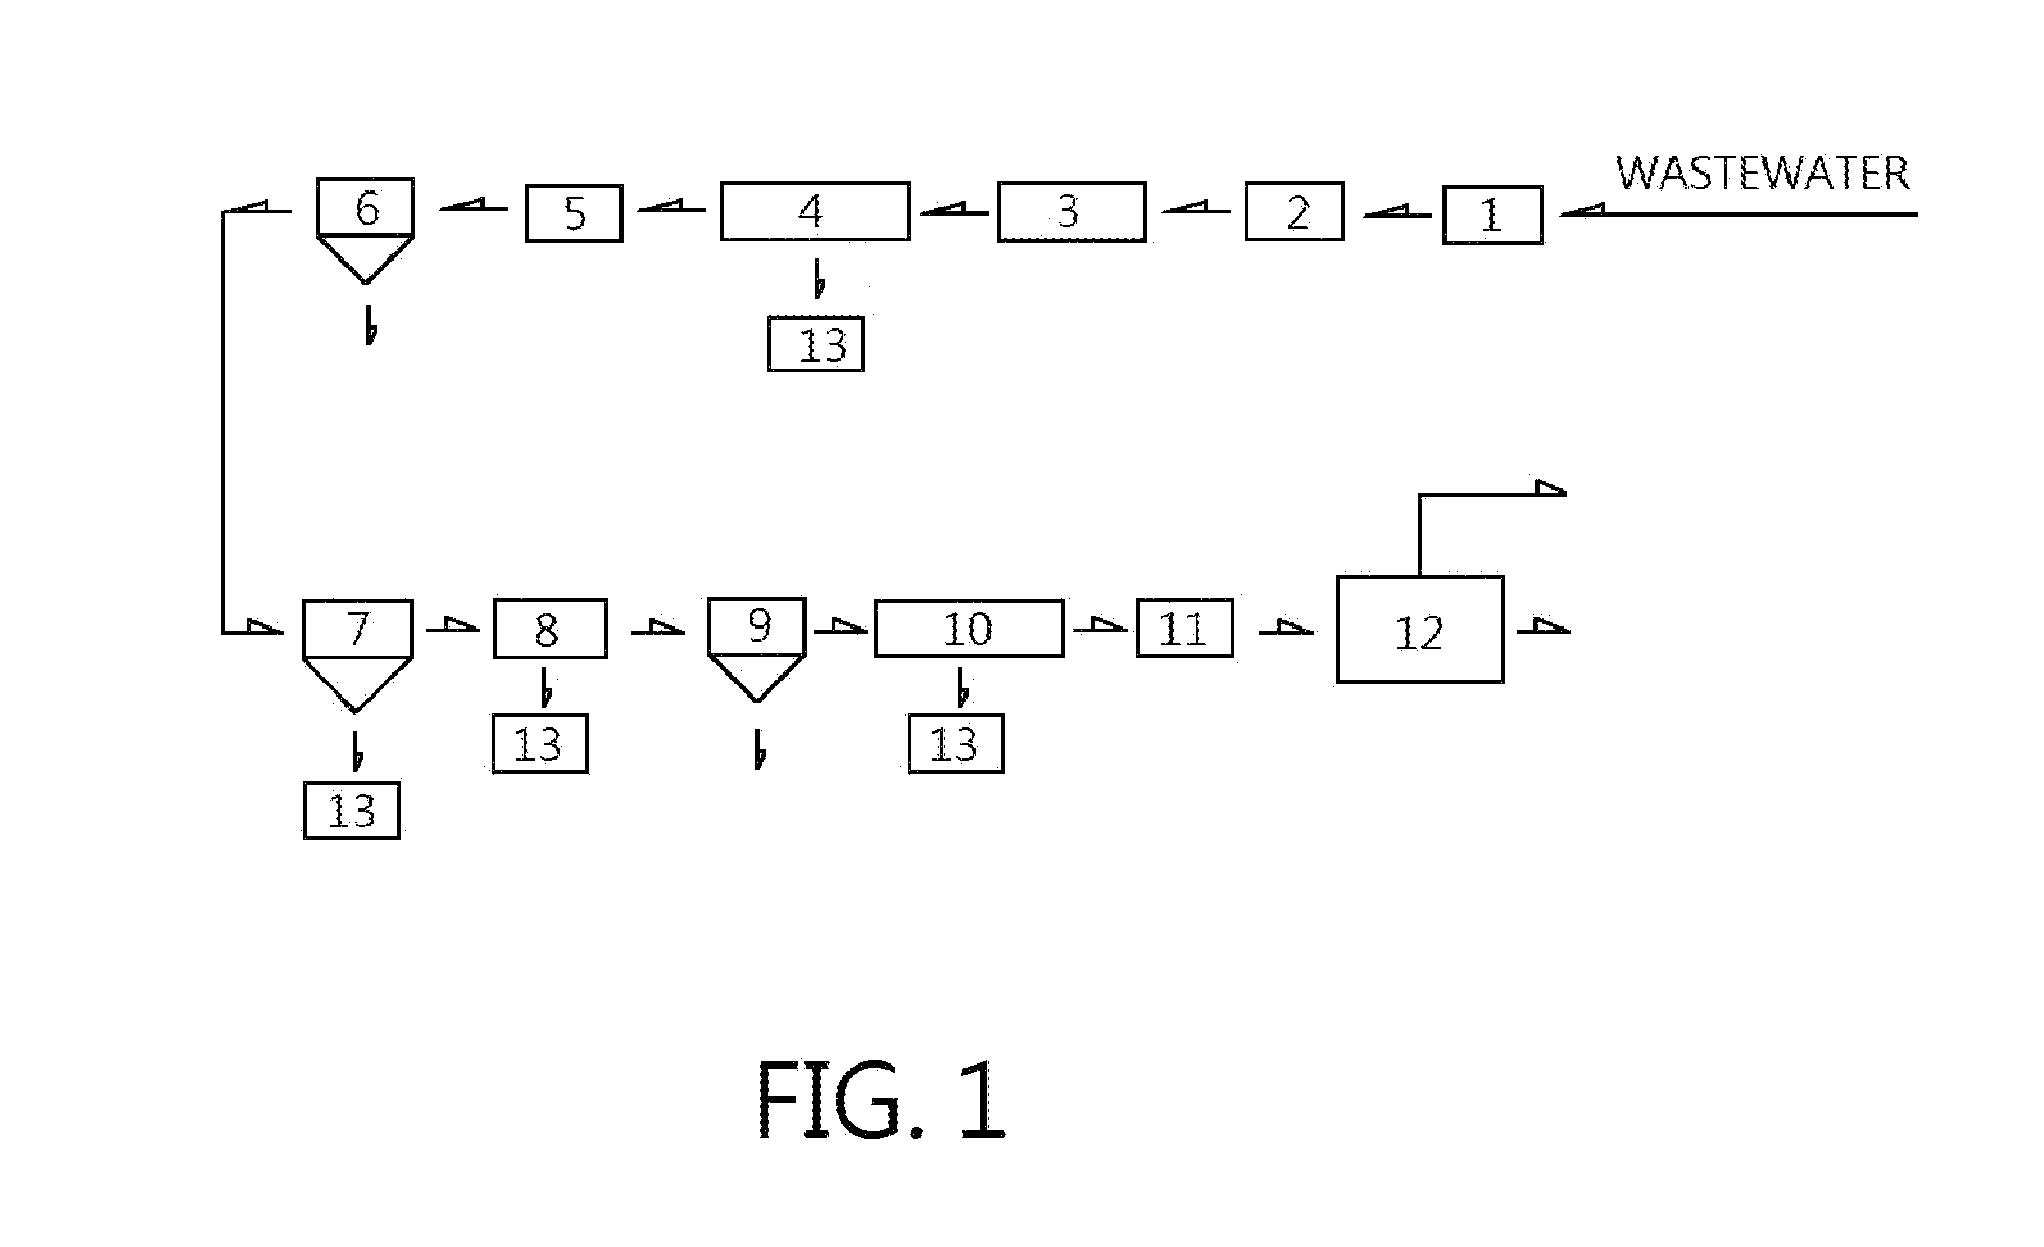 Tanning wastewater treatment and reuse apparatus and method therefor